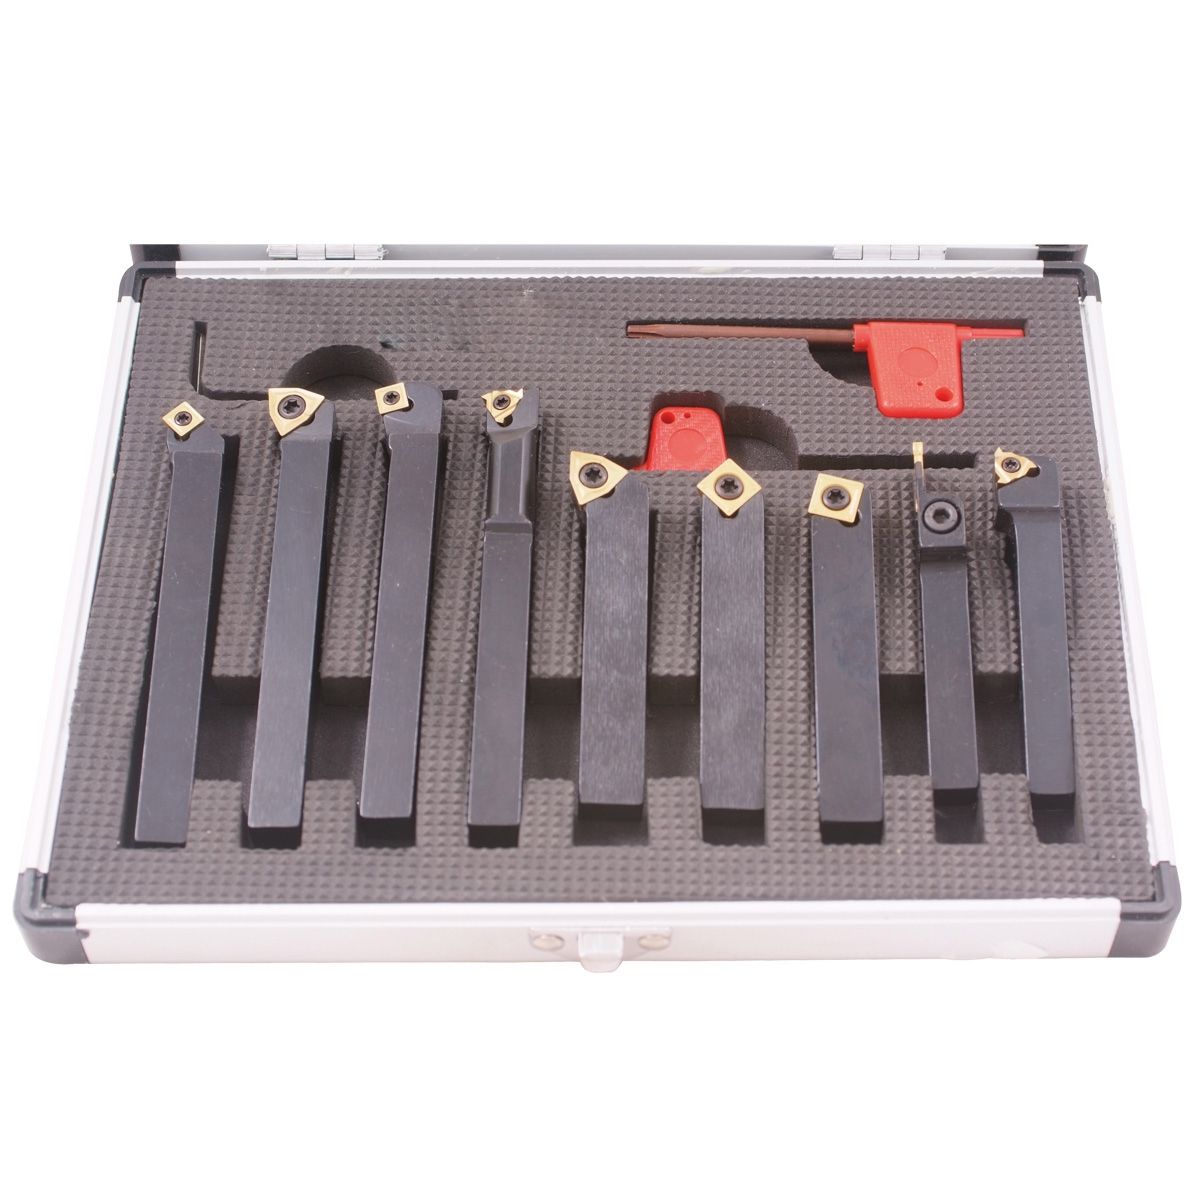 PRO-SERIES 9 PIECE 1/2" INDEXABLE CUT OFF & TURNING TOOL SET (2002-0213)